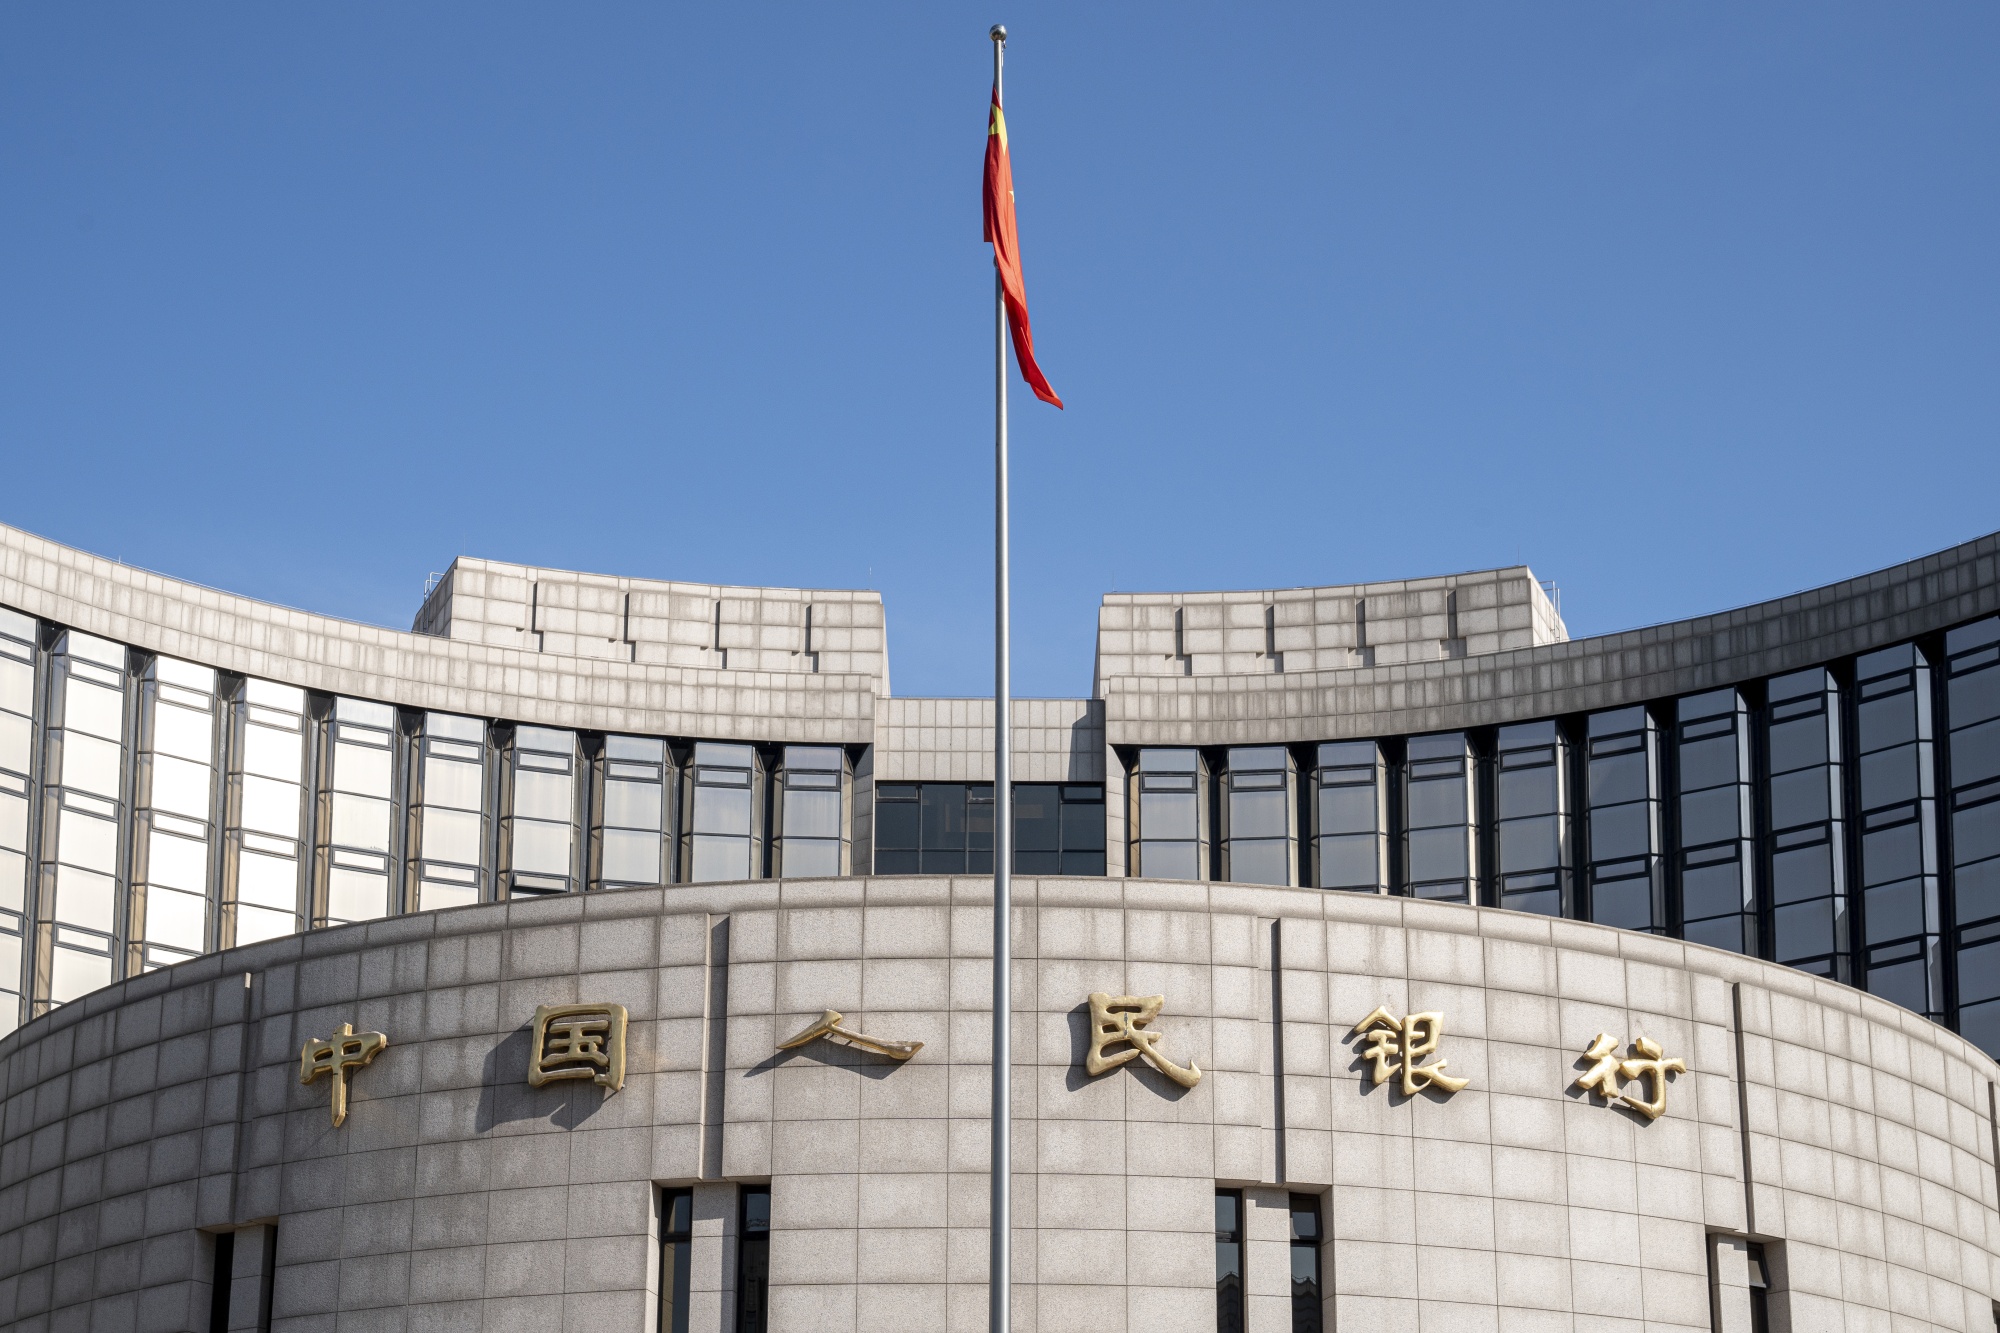 The People's Bank of China (PBOC) building in Beijing.